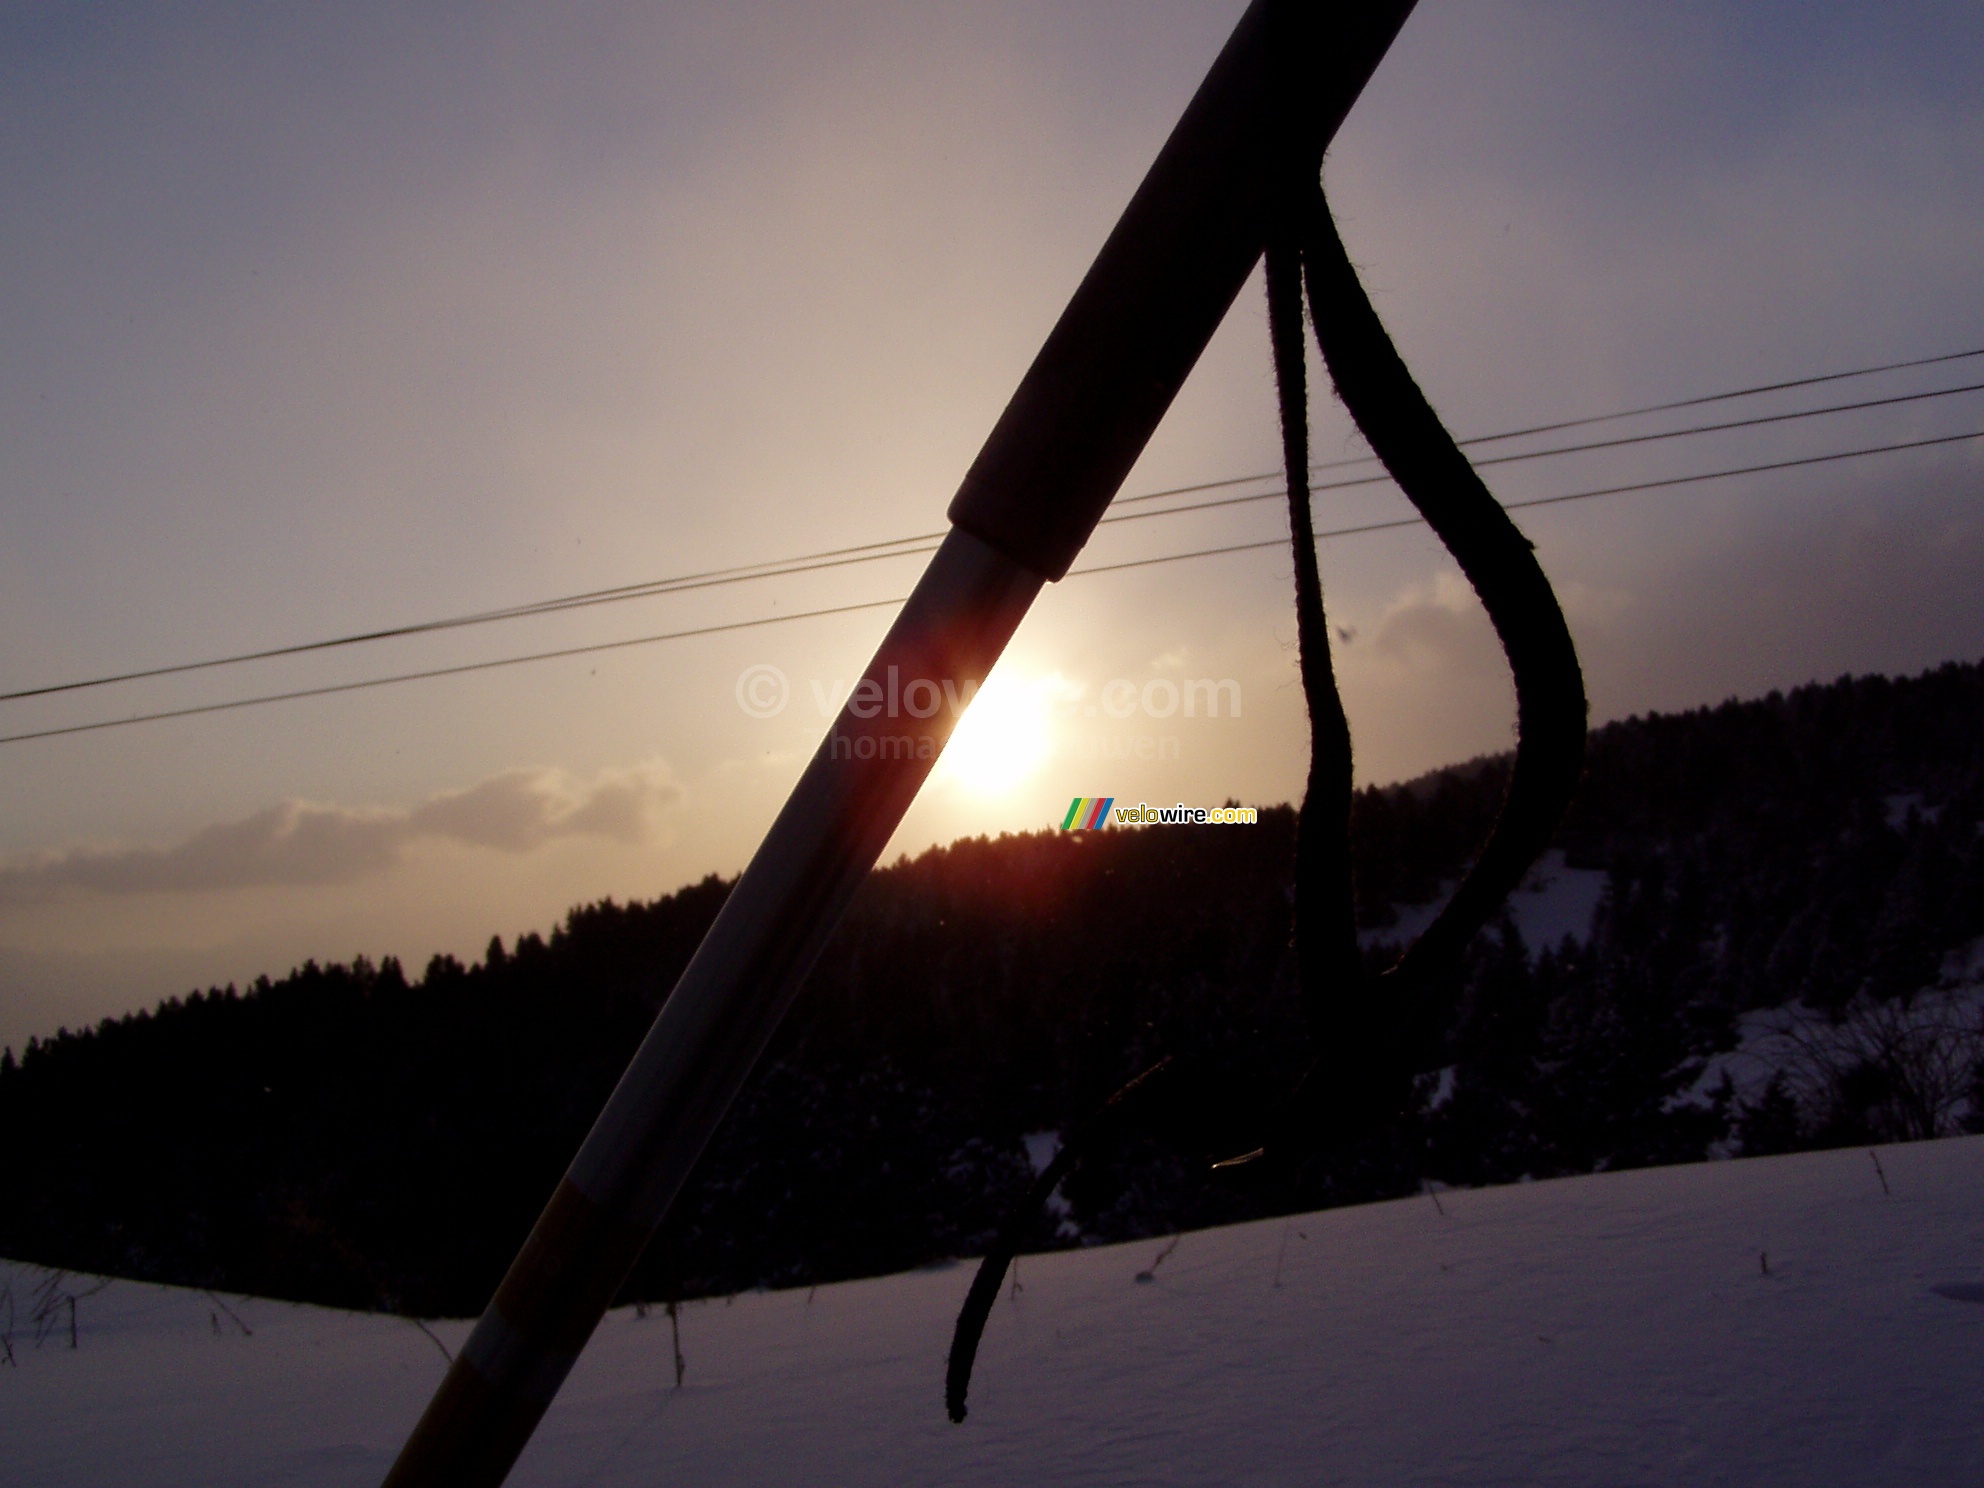 The sun going down behind the ski stick